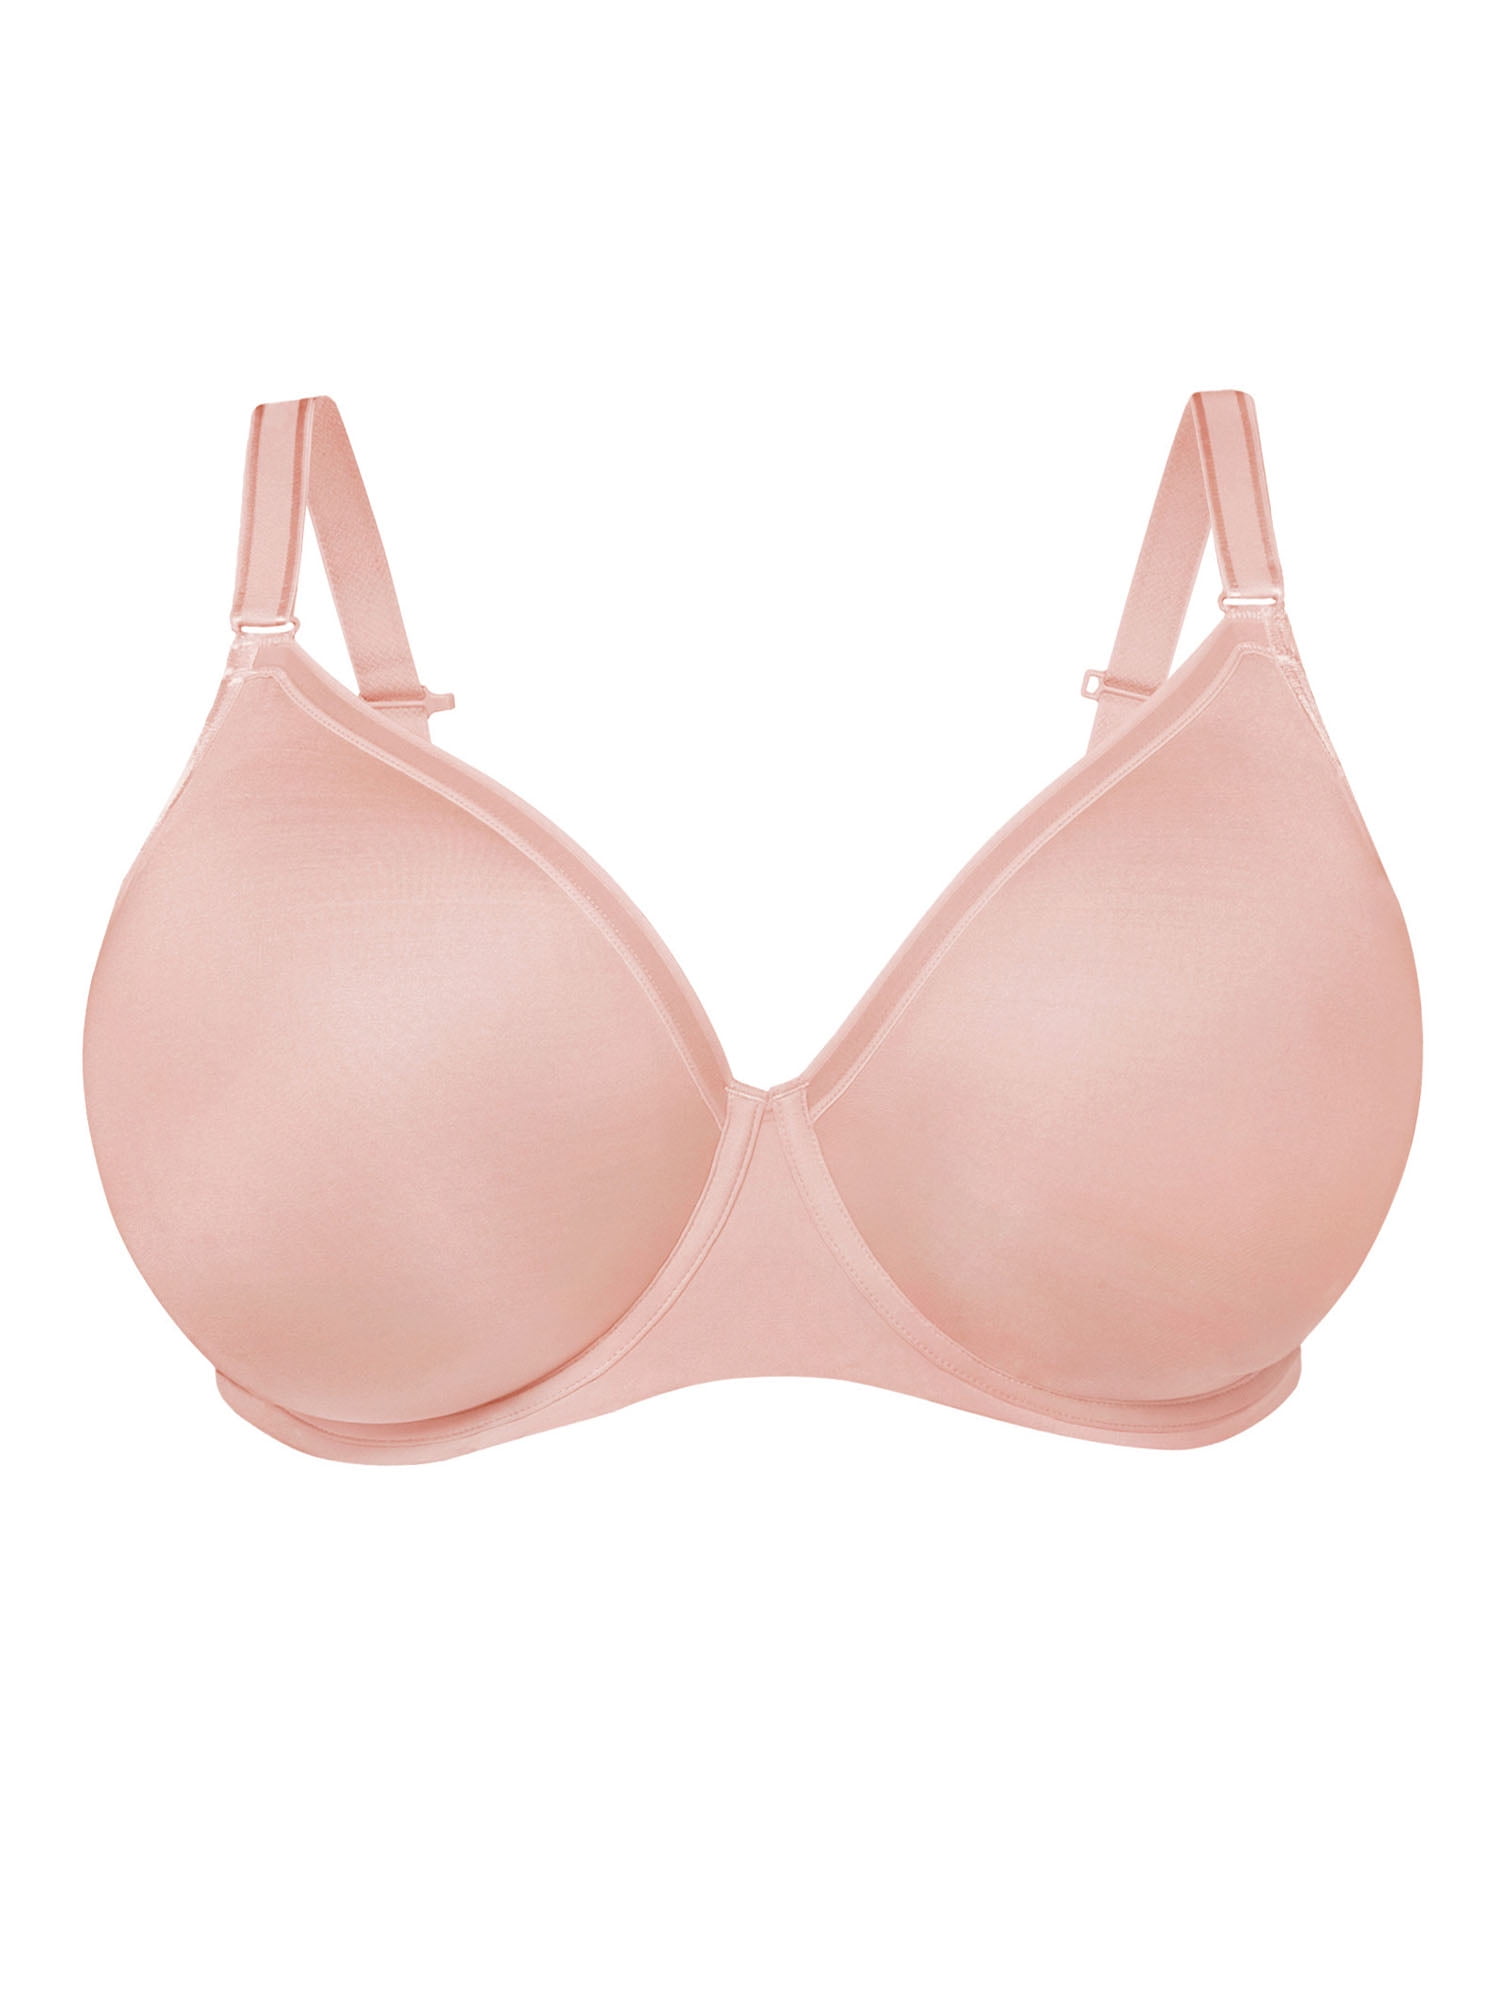 Breast Pasty Offers of The Day for Women Bras Fuller Figure New M Snag  Tights Chub Rub Shorts Popping Bubble Toy Ecru : : Fashion